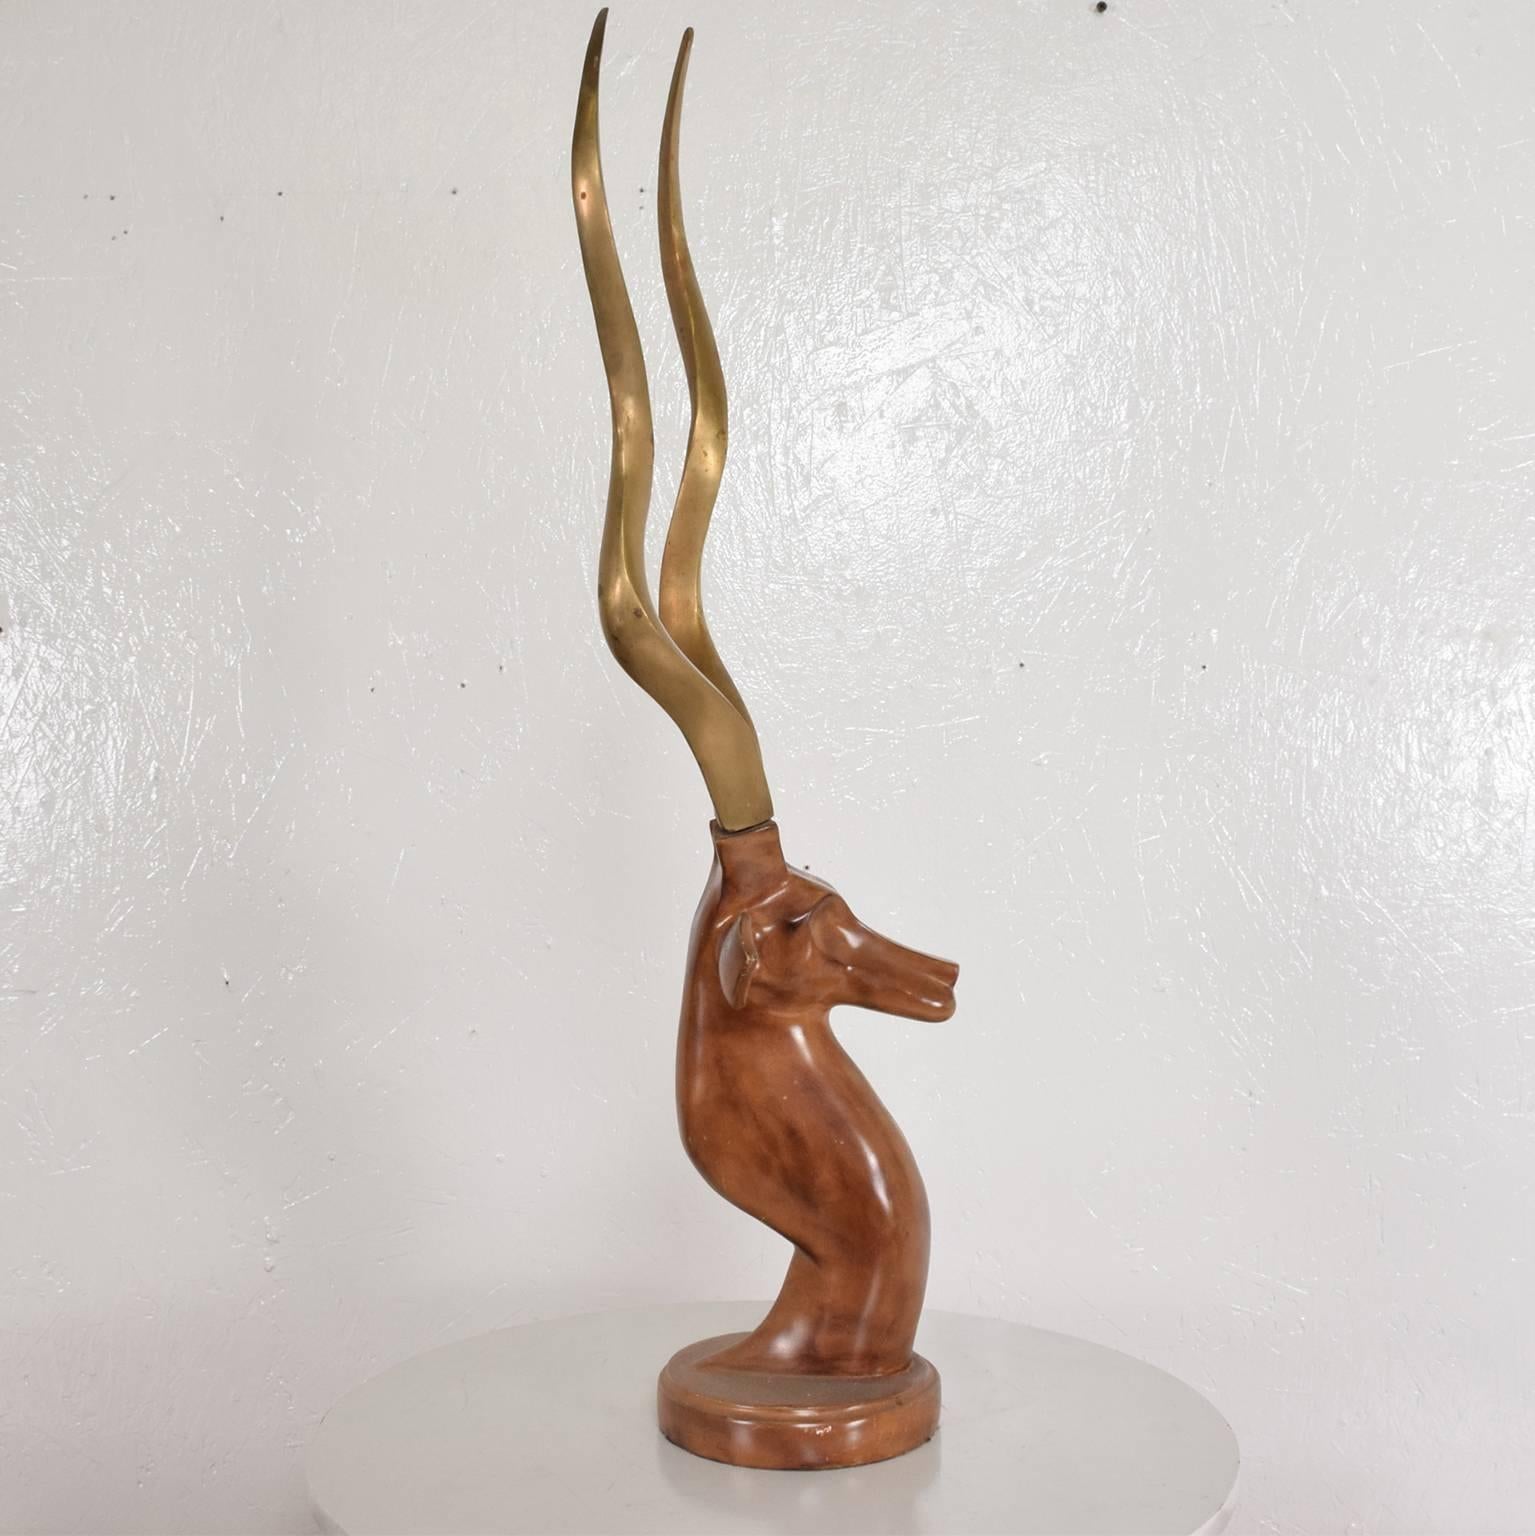 American Midcentury Style Metal Gazelle with Brass Antlers